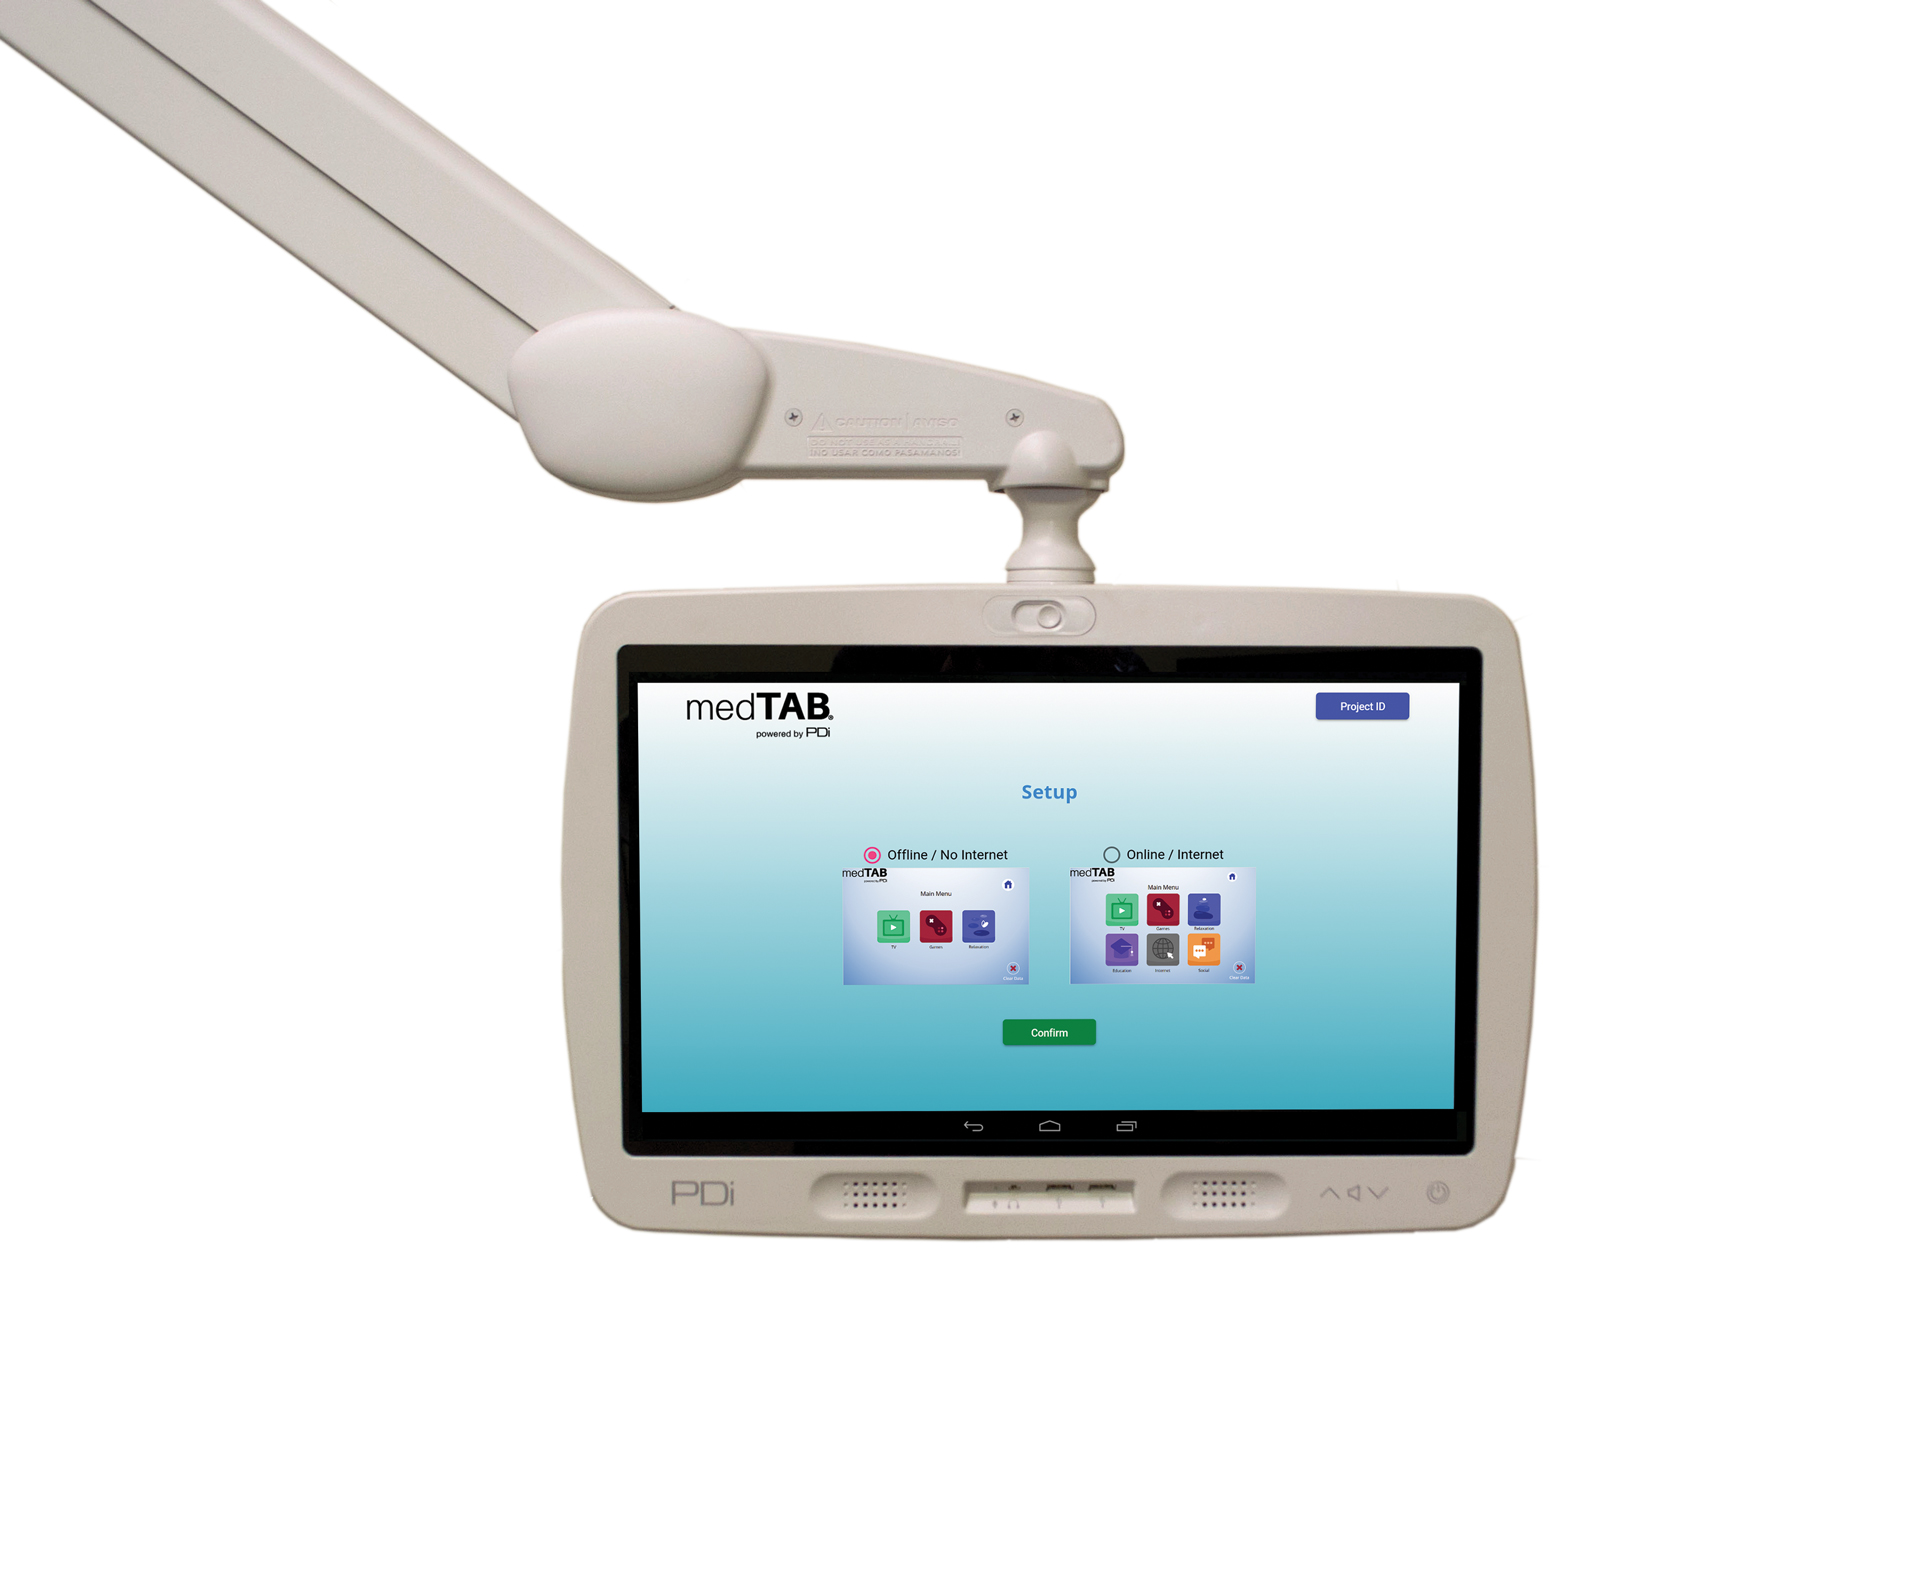 Product image of the medTAB19 healthcare television built by PDi Communication Systems, Inc. on the set up screen choosing between internet or no internet connection